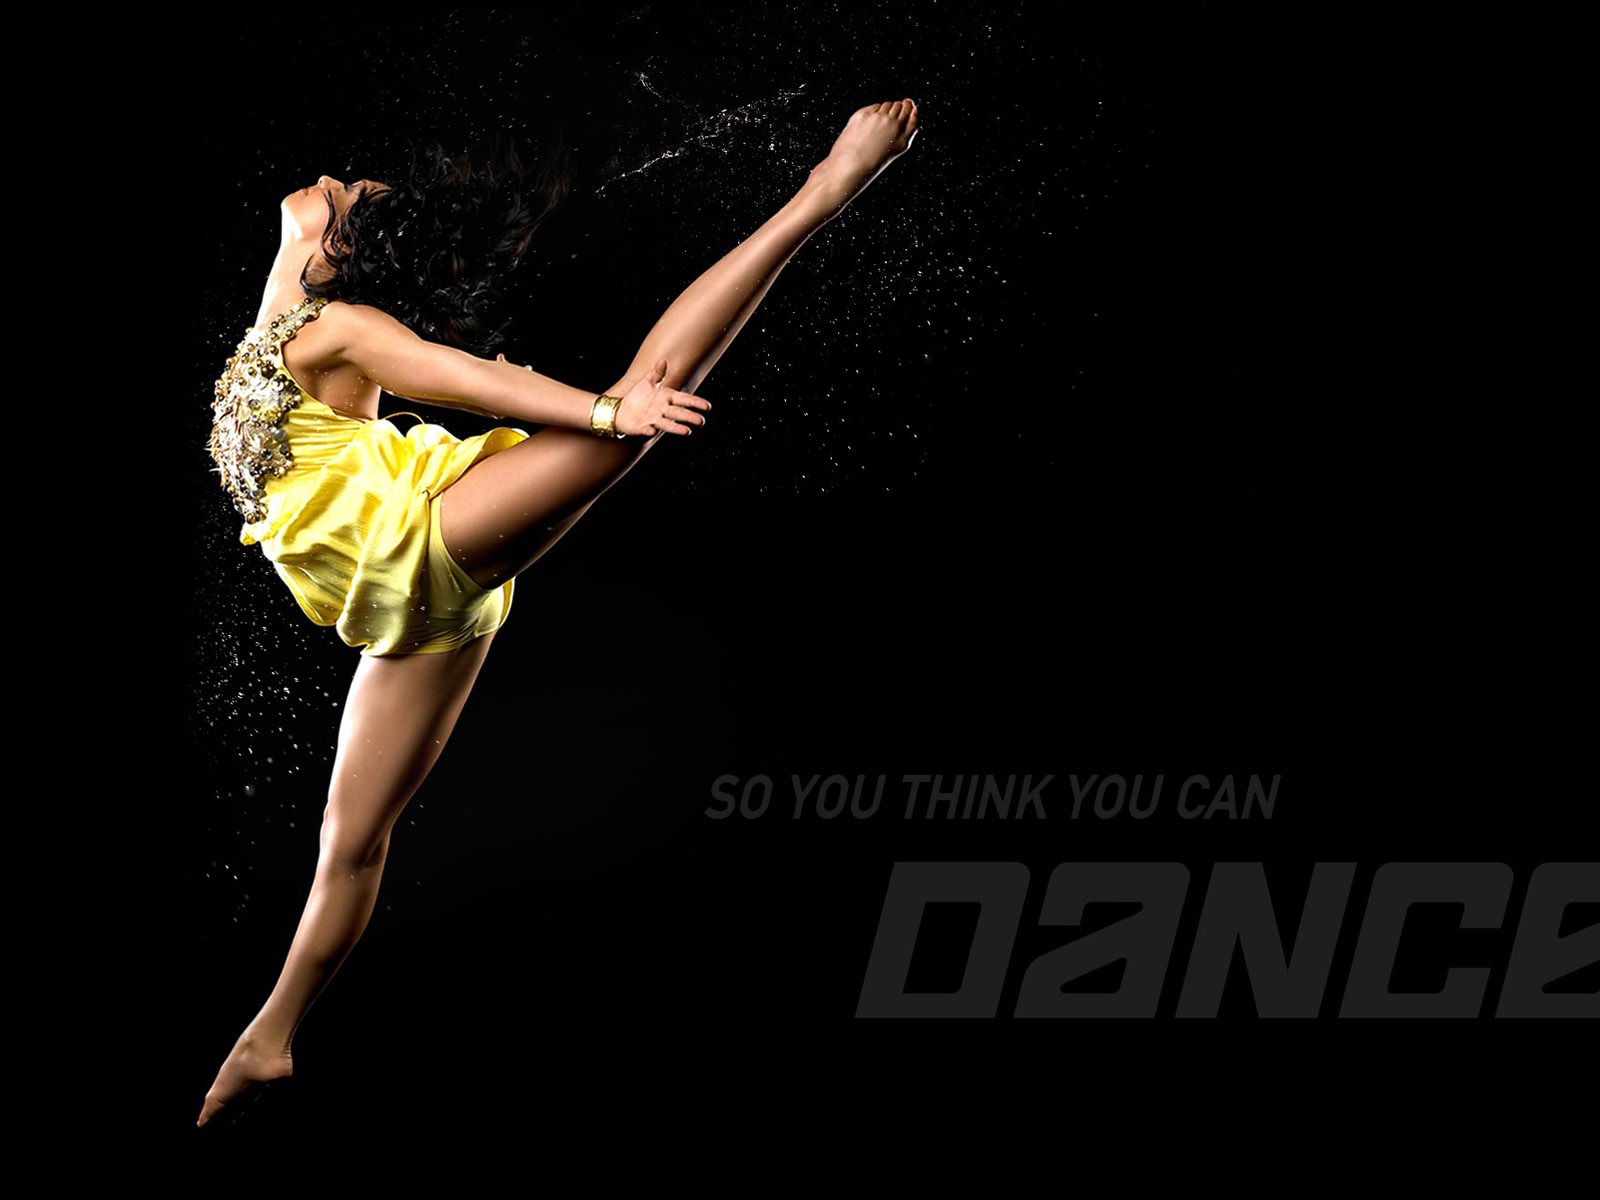 So You Think You Can Dance 舞林争霸 壁纸(一)19 - 1600x1200